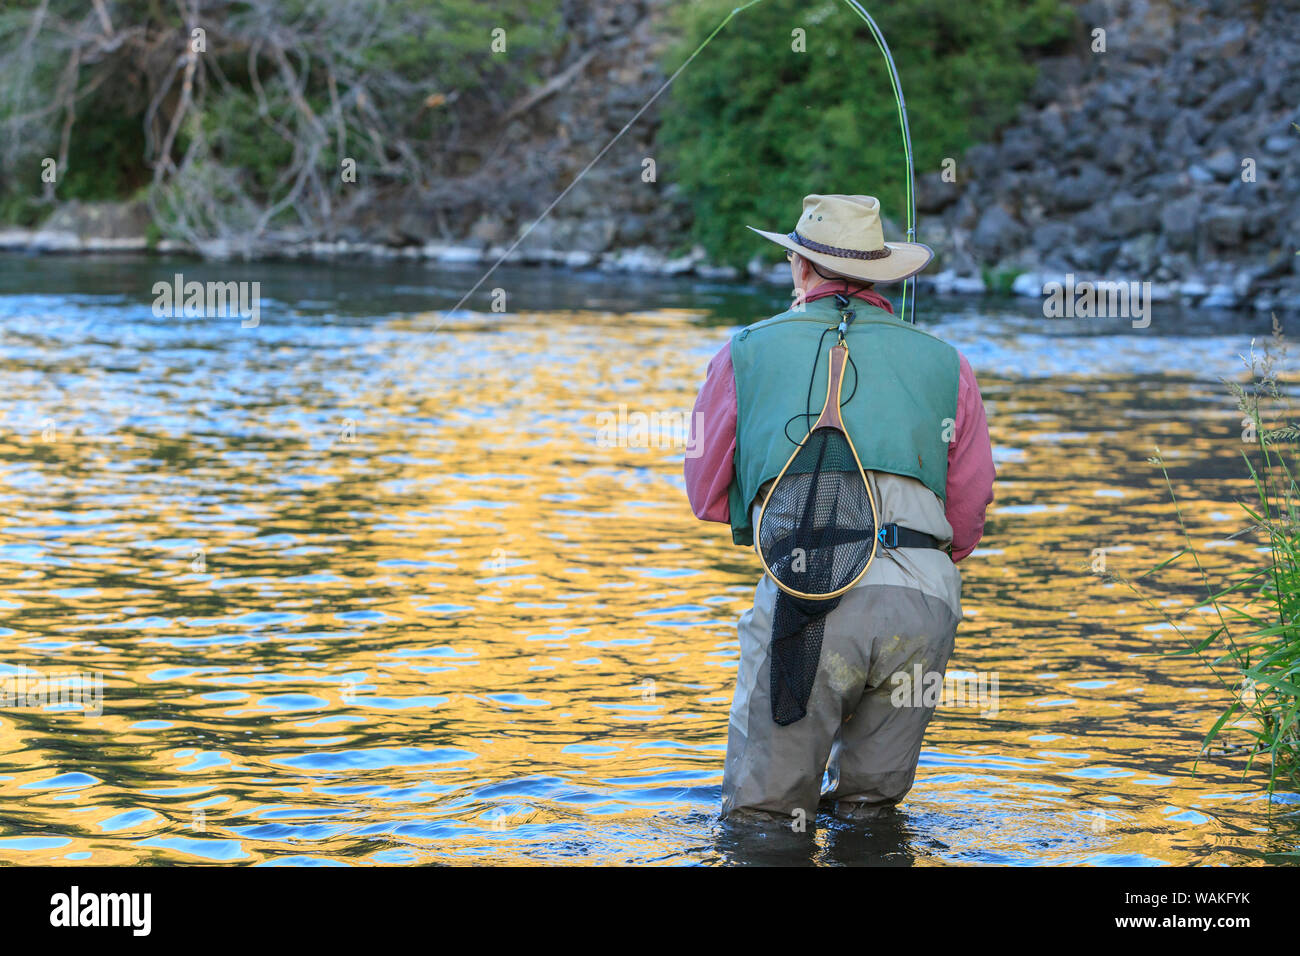 People fly fishing, Lower Deschutes River, Central Oregon, USA (MR) Stock Photo